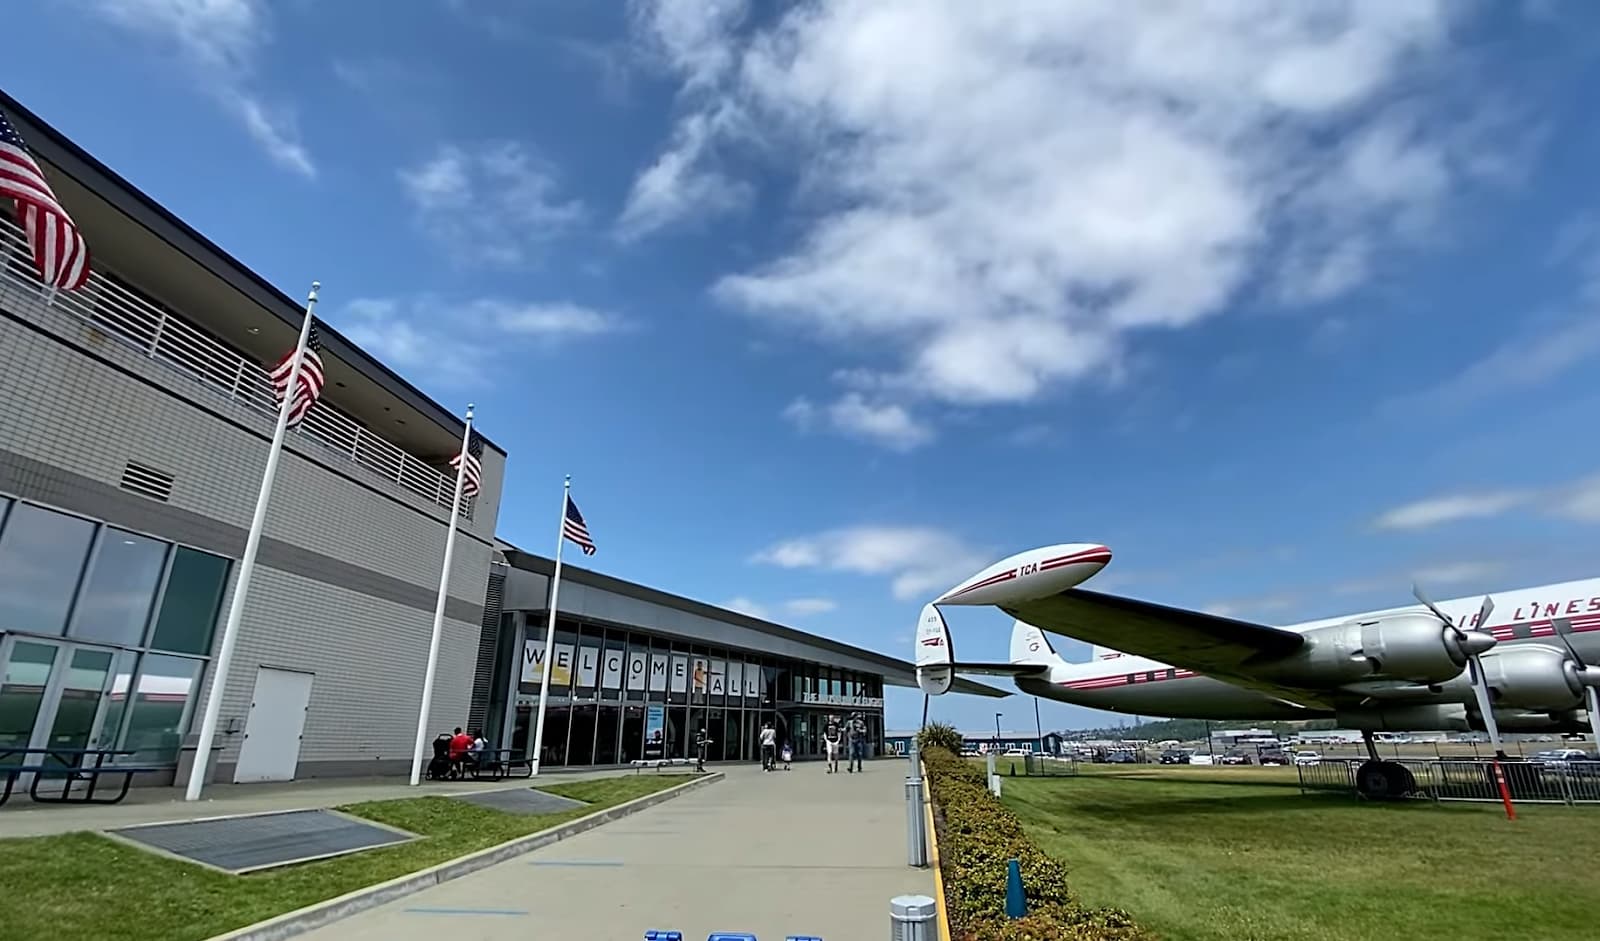 A Comprehensive Guide to the Museum of Flight